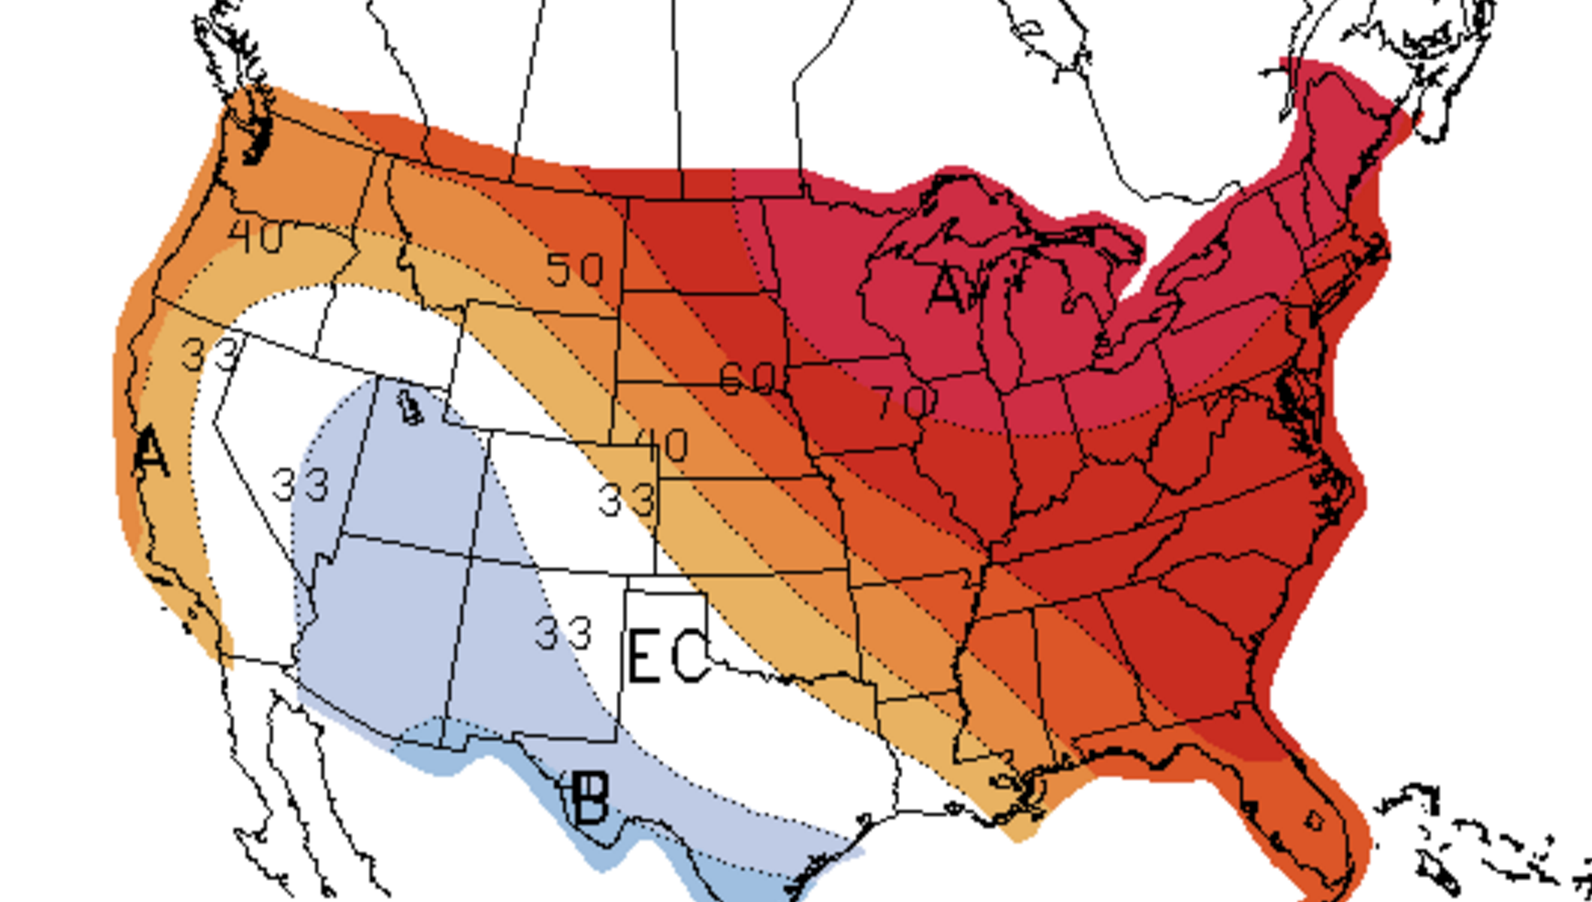  (Image: NWS Climate Prediction Center) 